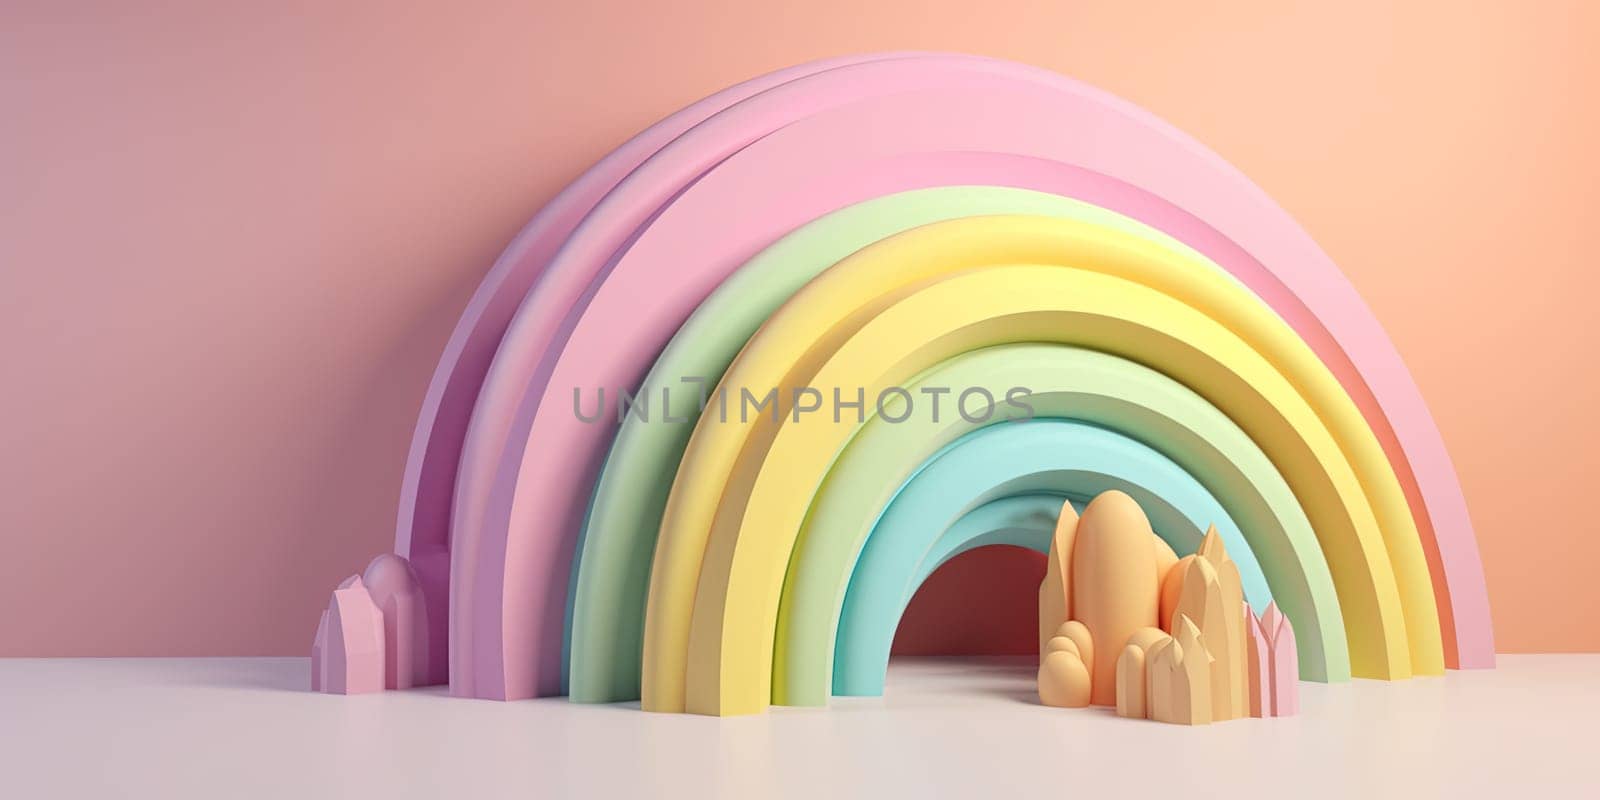 3D Illustration Of Rainbow As A Kid'S Toy On A Table